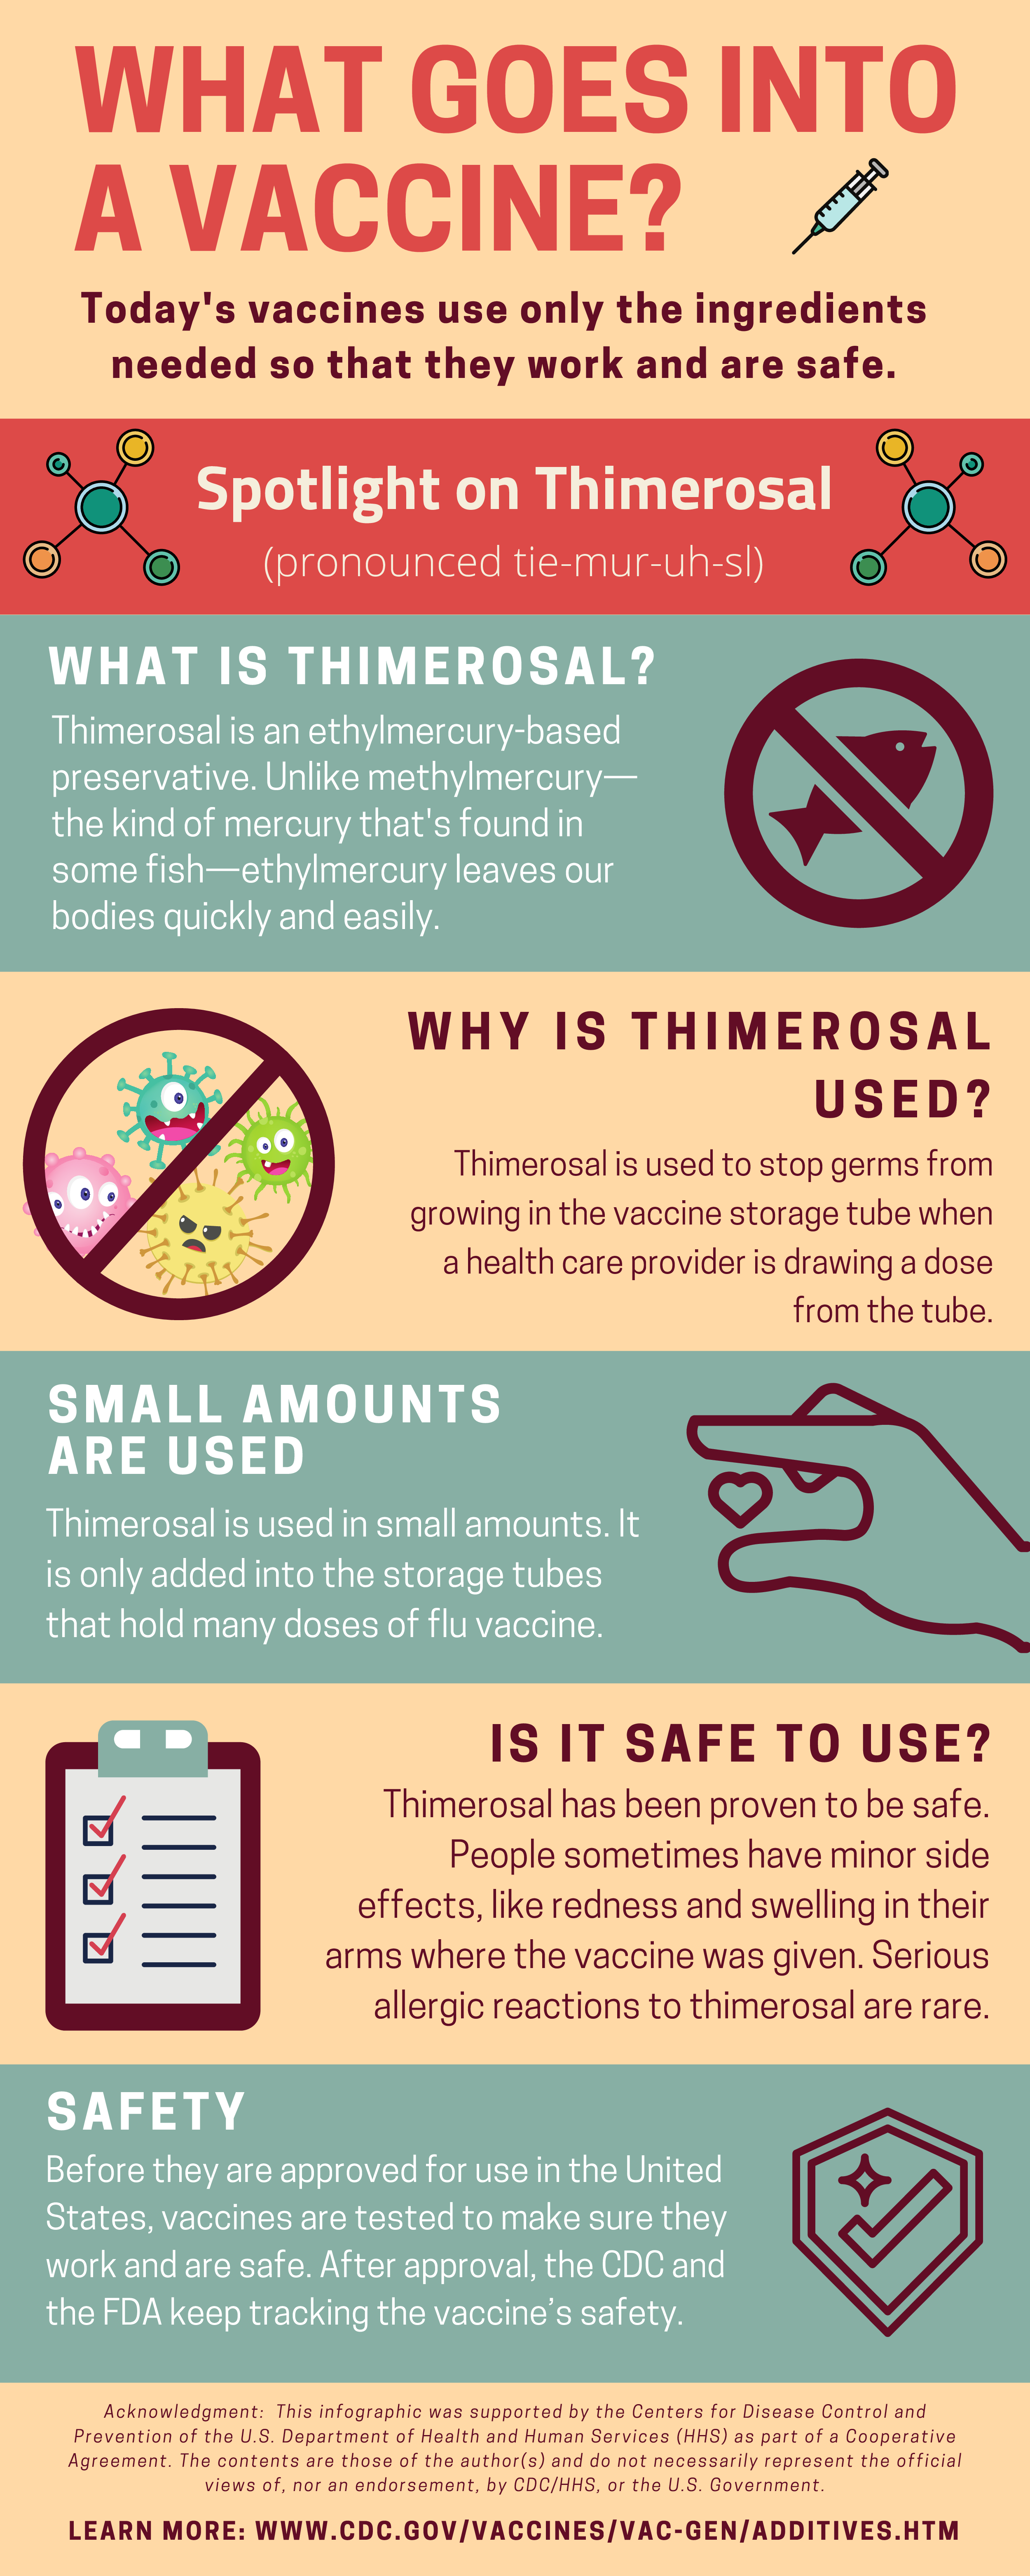 Factsheet details thimerosal, its use in modern vaccines and its proven safety.